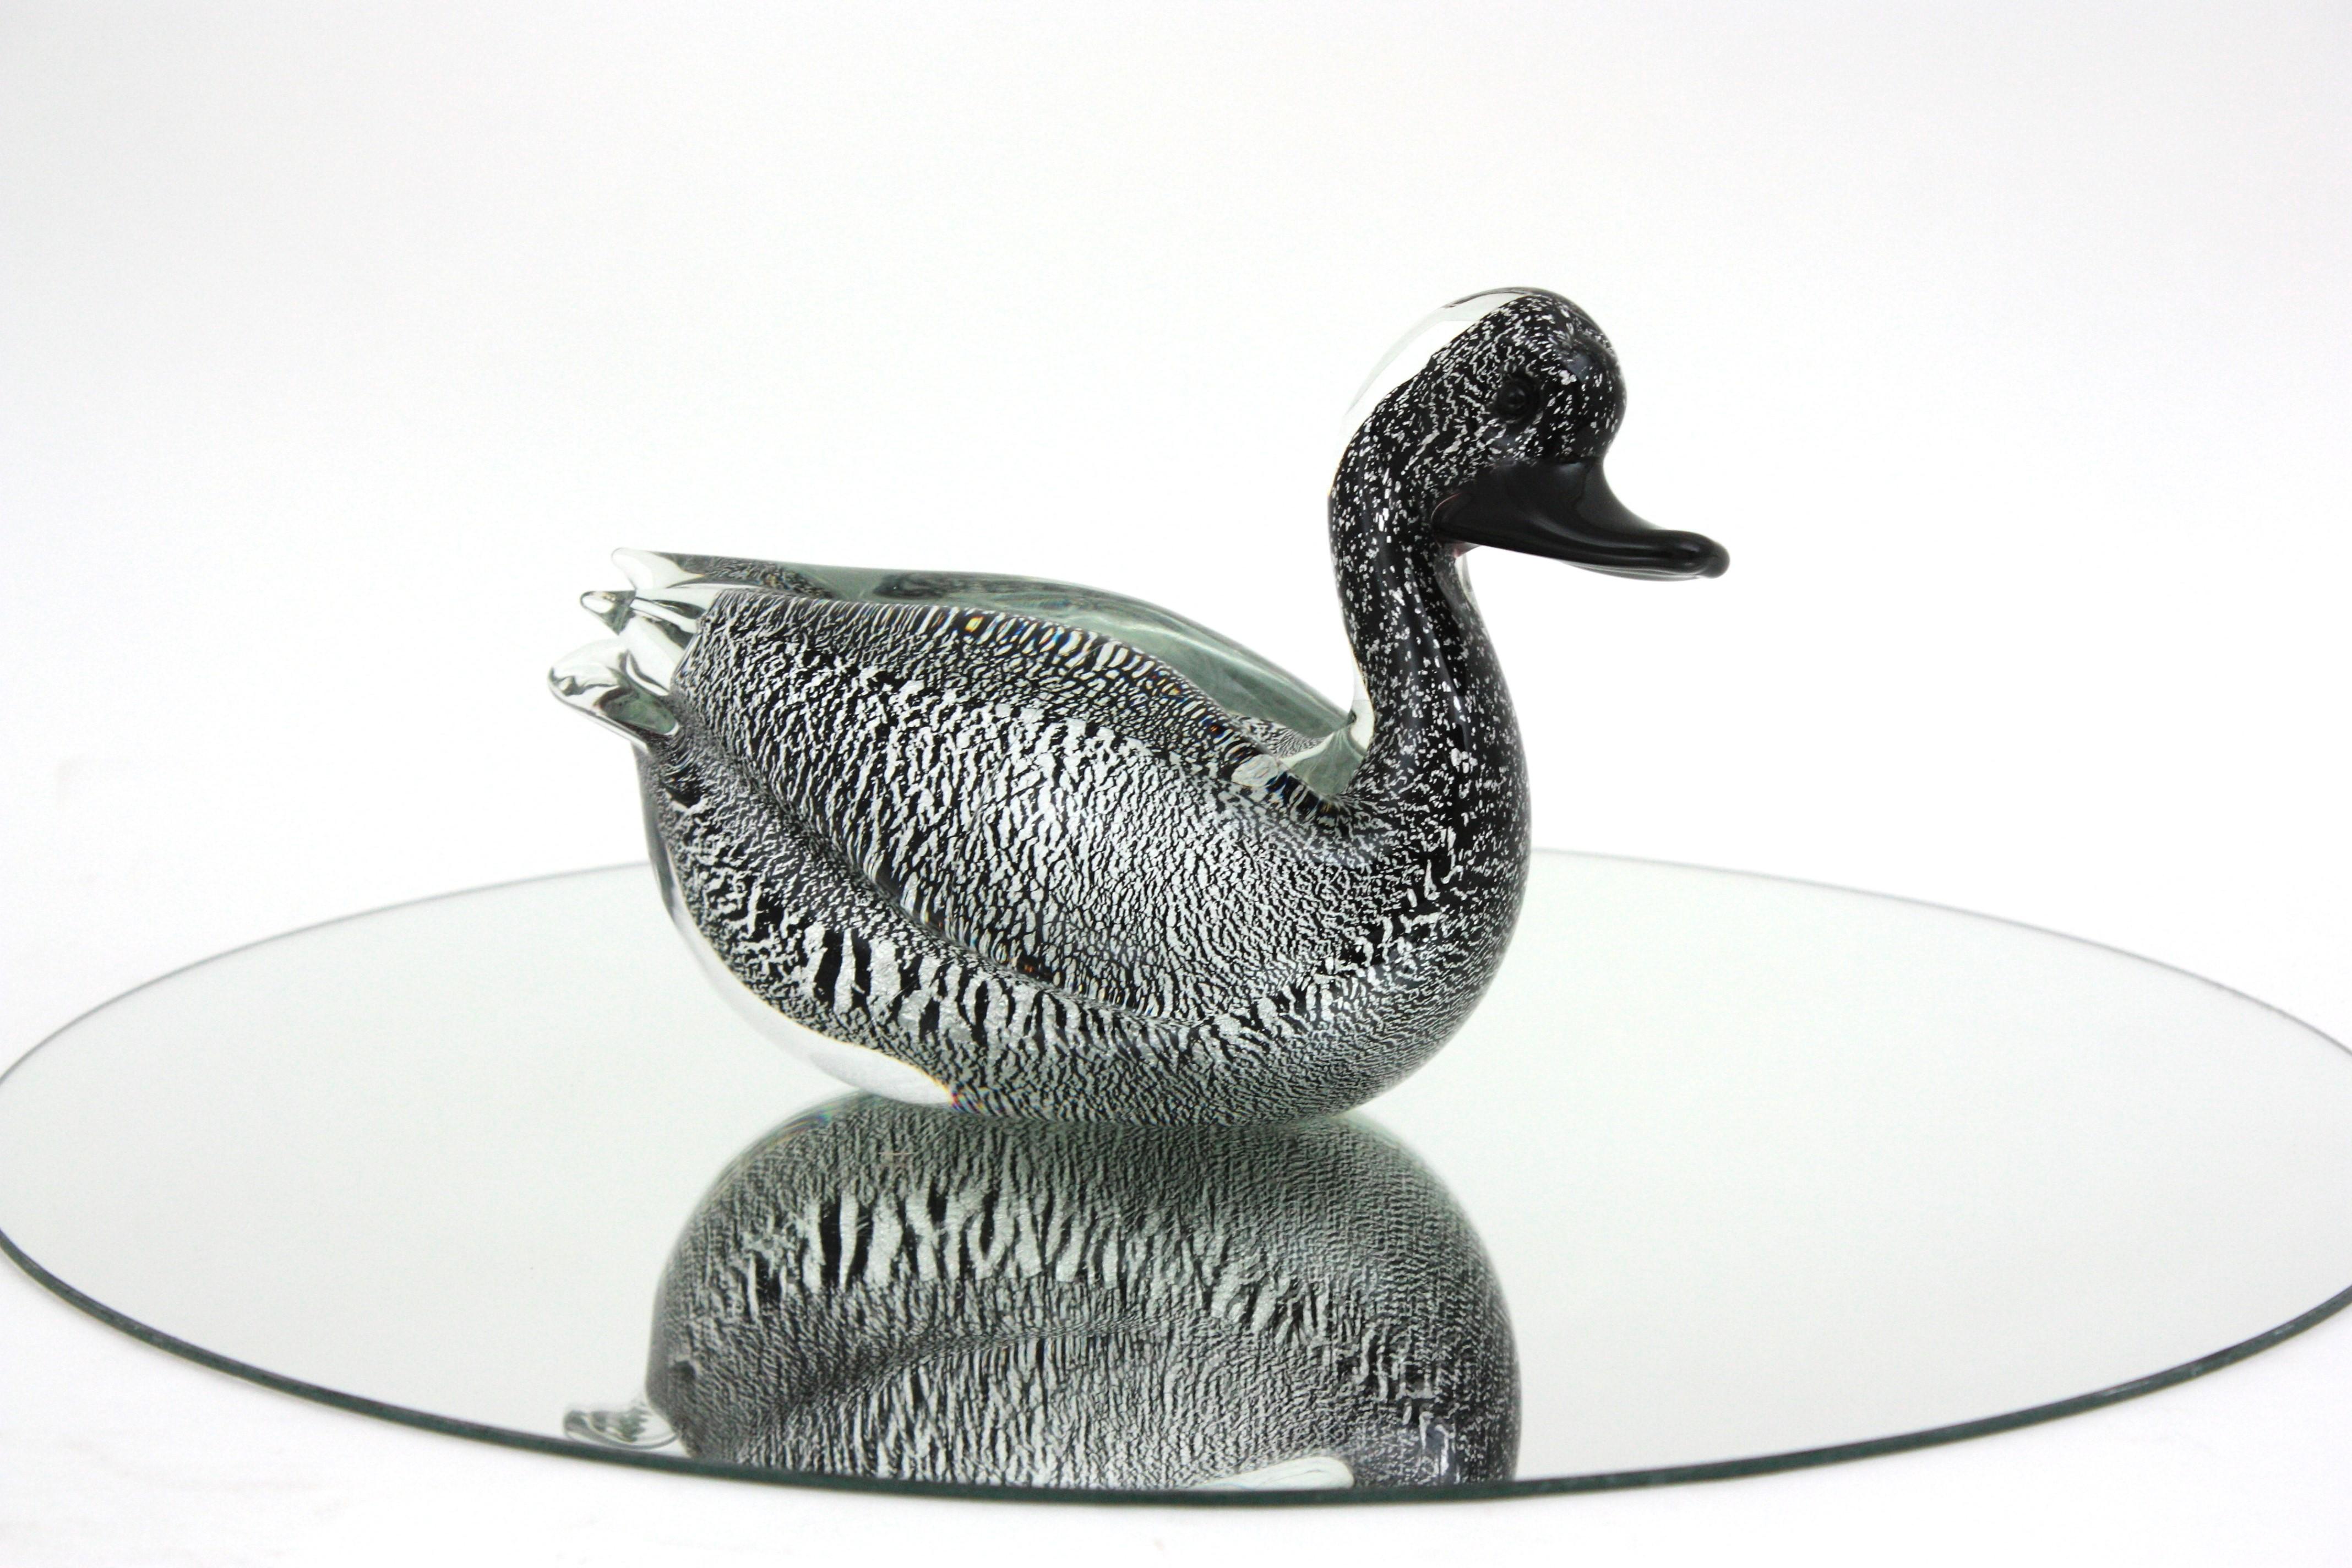  Murano Black Clear Duck Sculpture Art Glass Paperweight with Silver Flecks For Sale 1